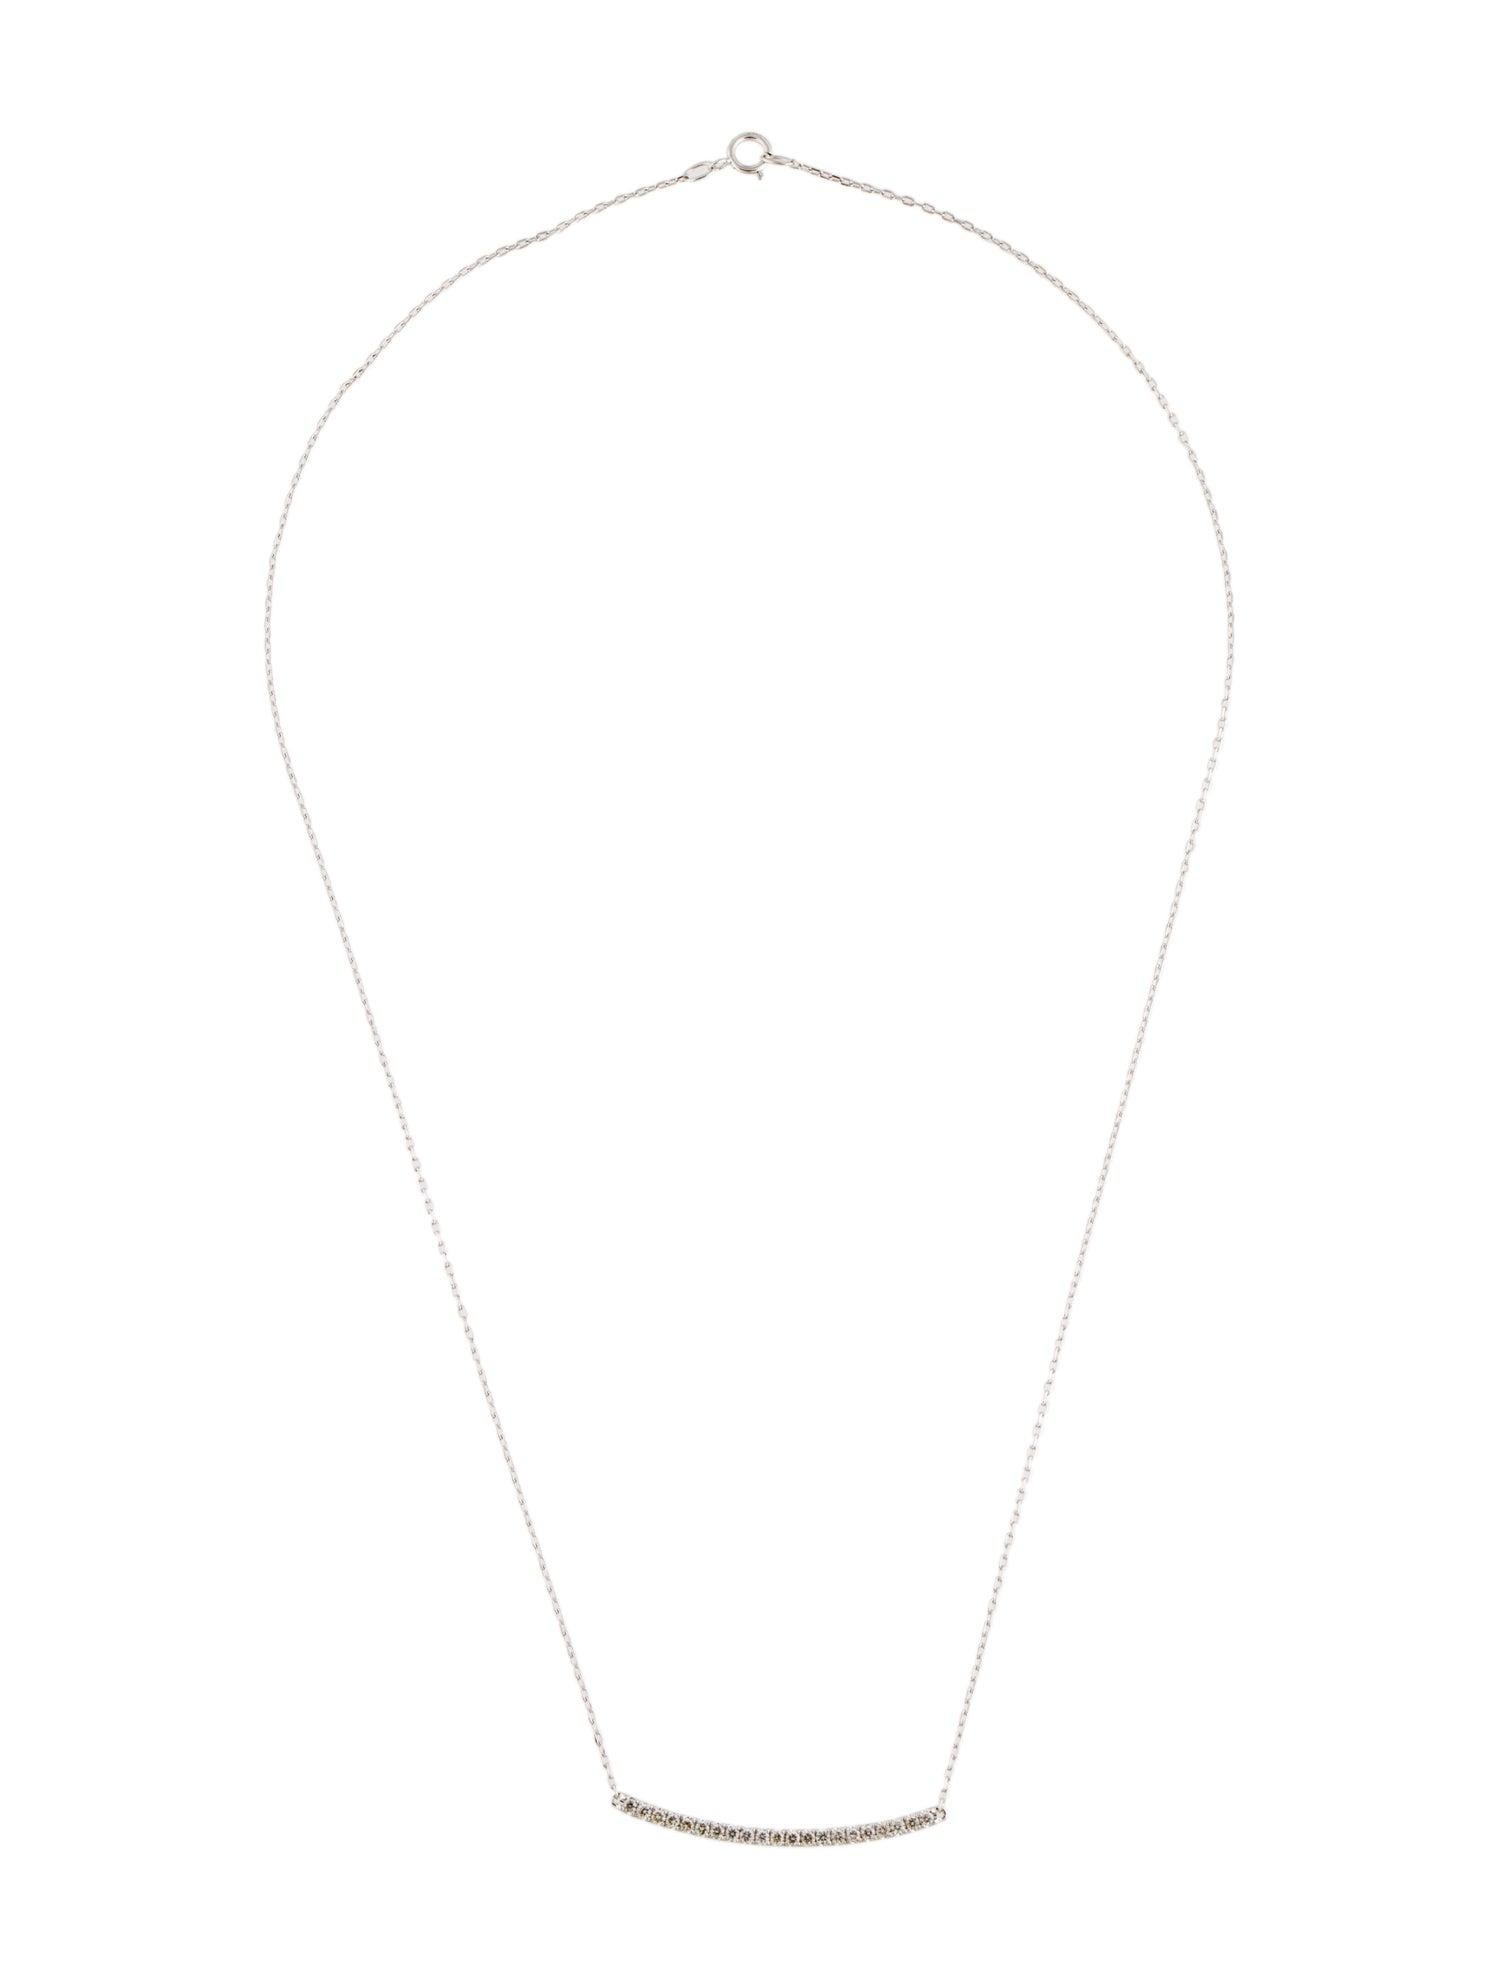 Contemporary 14k White Gold 0.26 Carat Diamond Bar Necklace For Sale